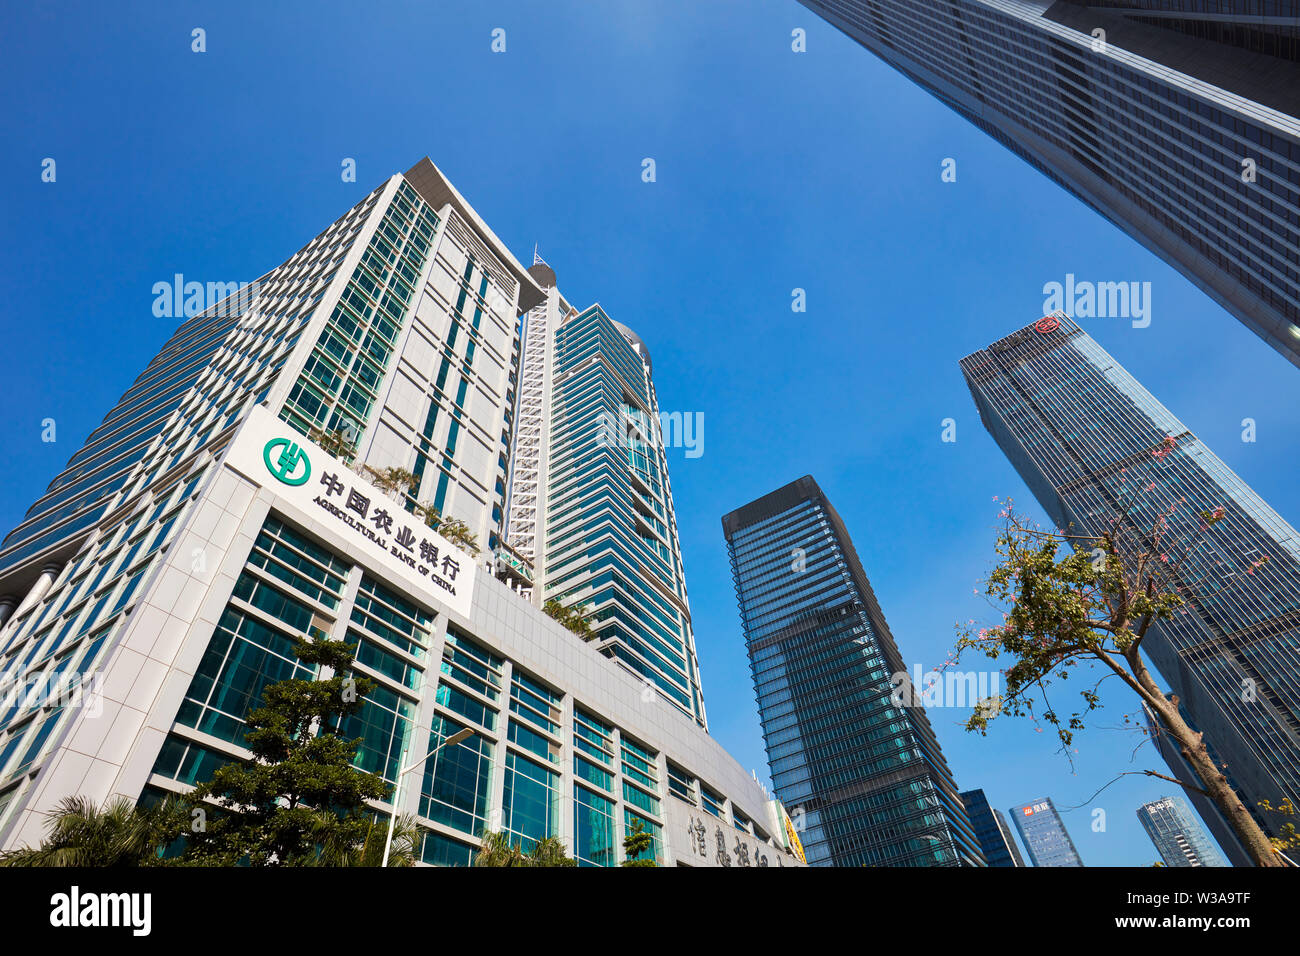 Agricultural Bank of China and other high-rise buildings in Futian Central Business District. Shenzhen, Guangdong Province, China. Stock Photo